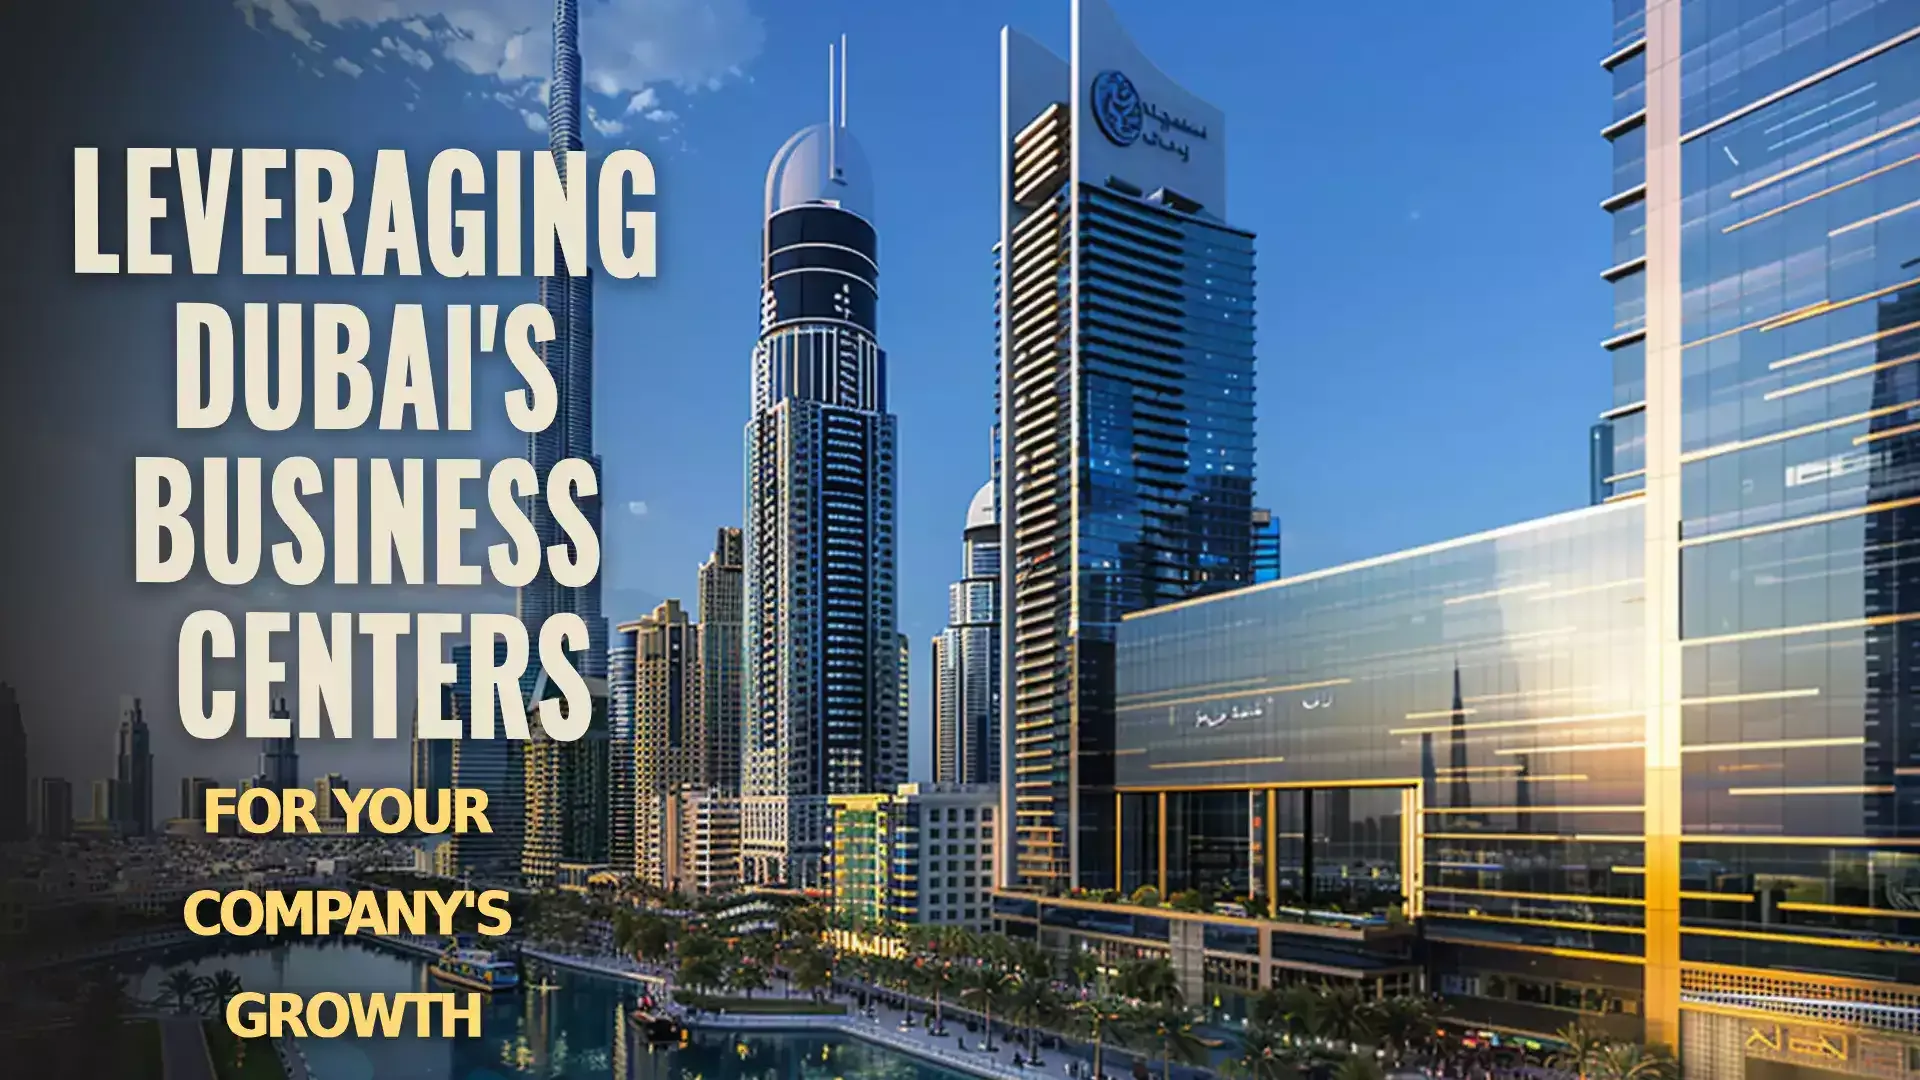 Dubai's Business Centers: A Hub of Commerce and Innovation